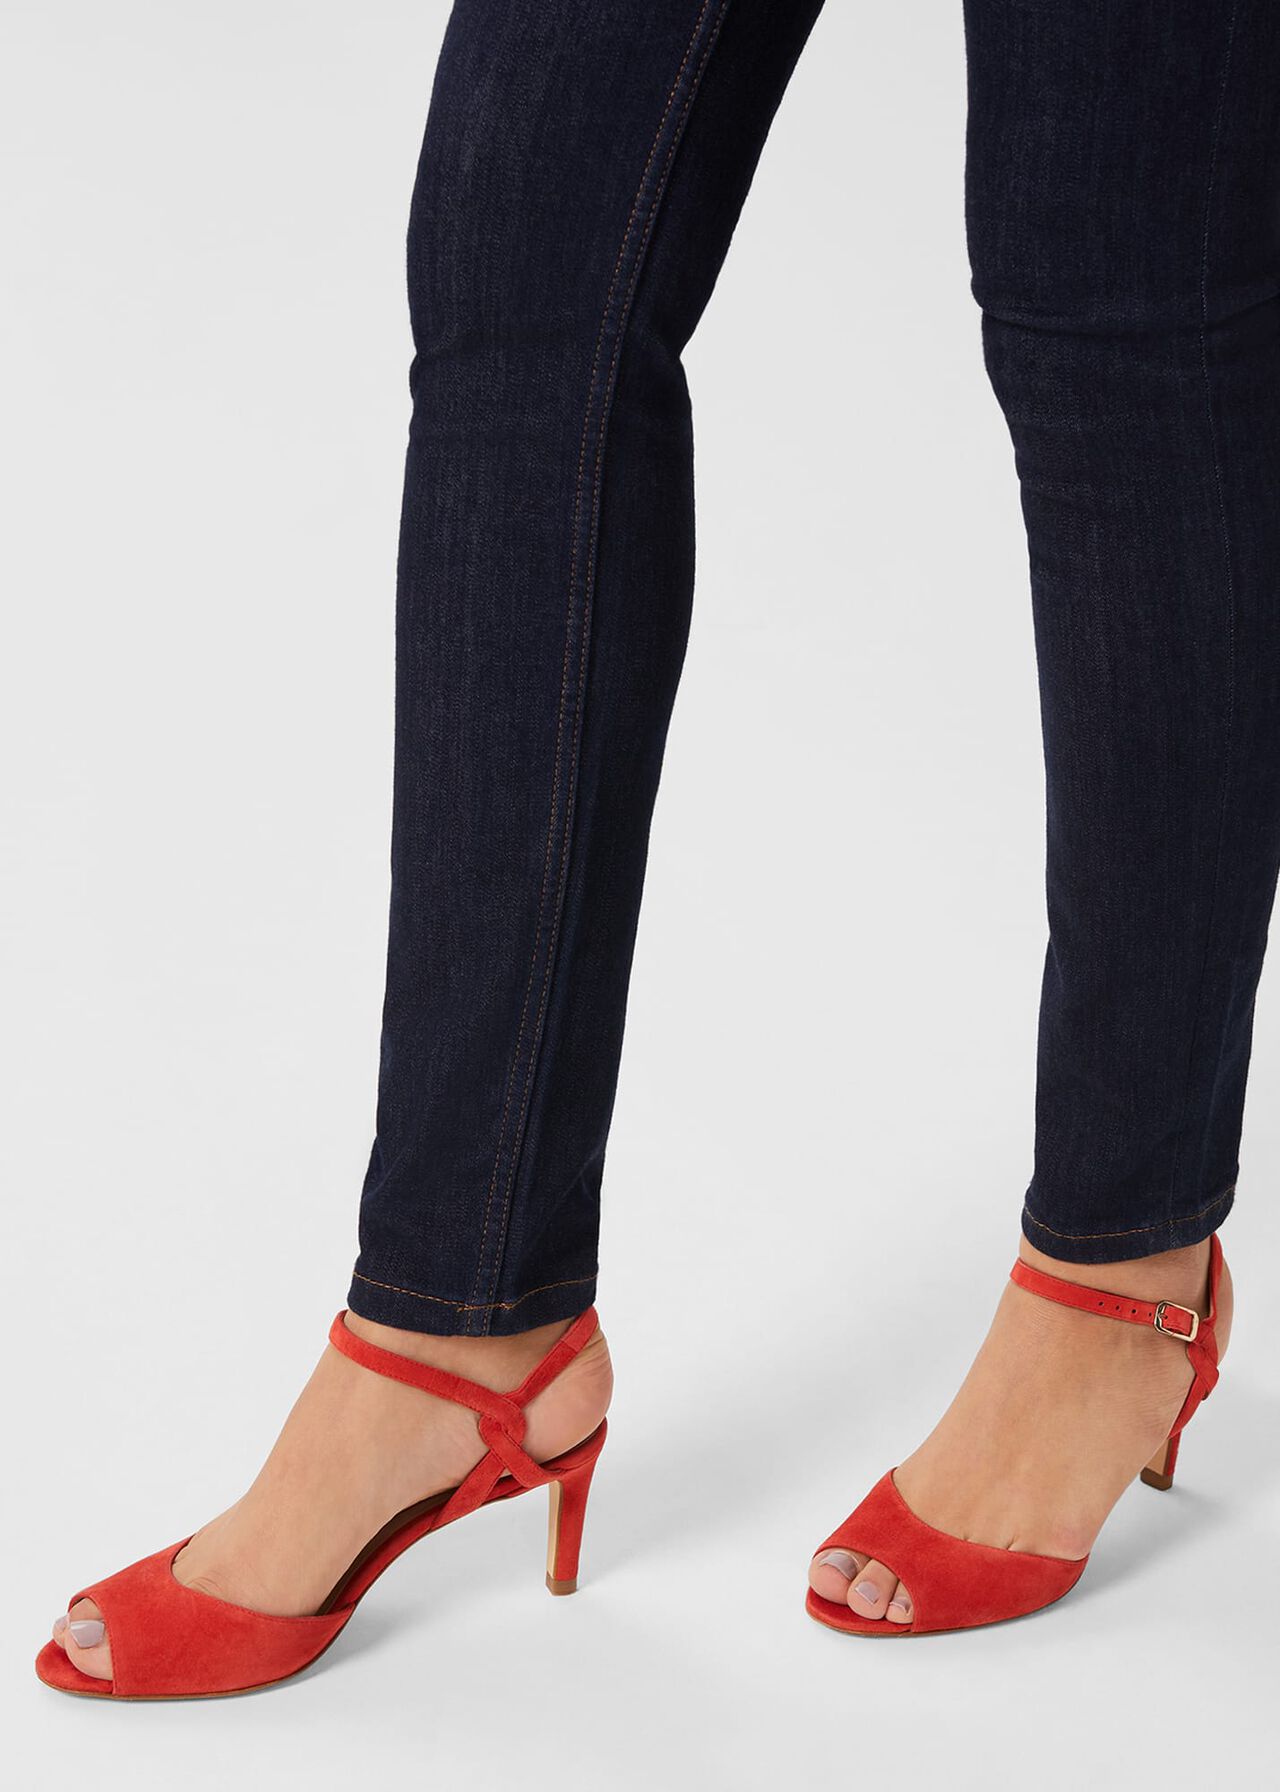 Leia Suede Heeled Sandals, Flame Red, hi-res